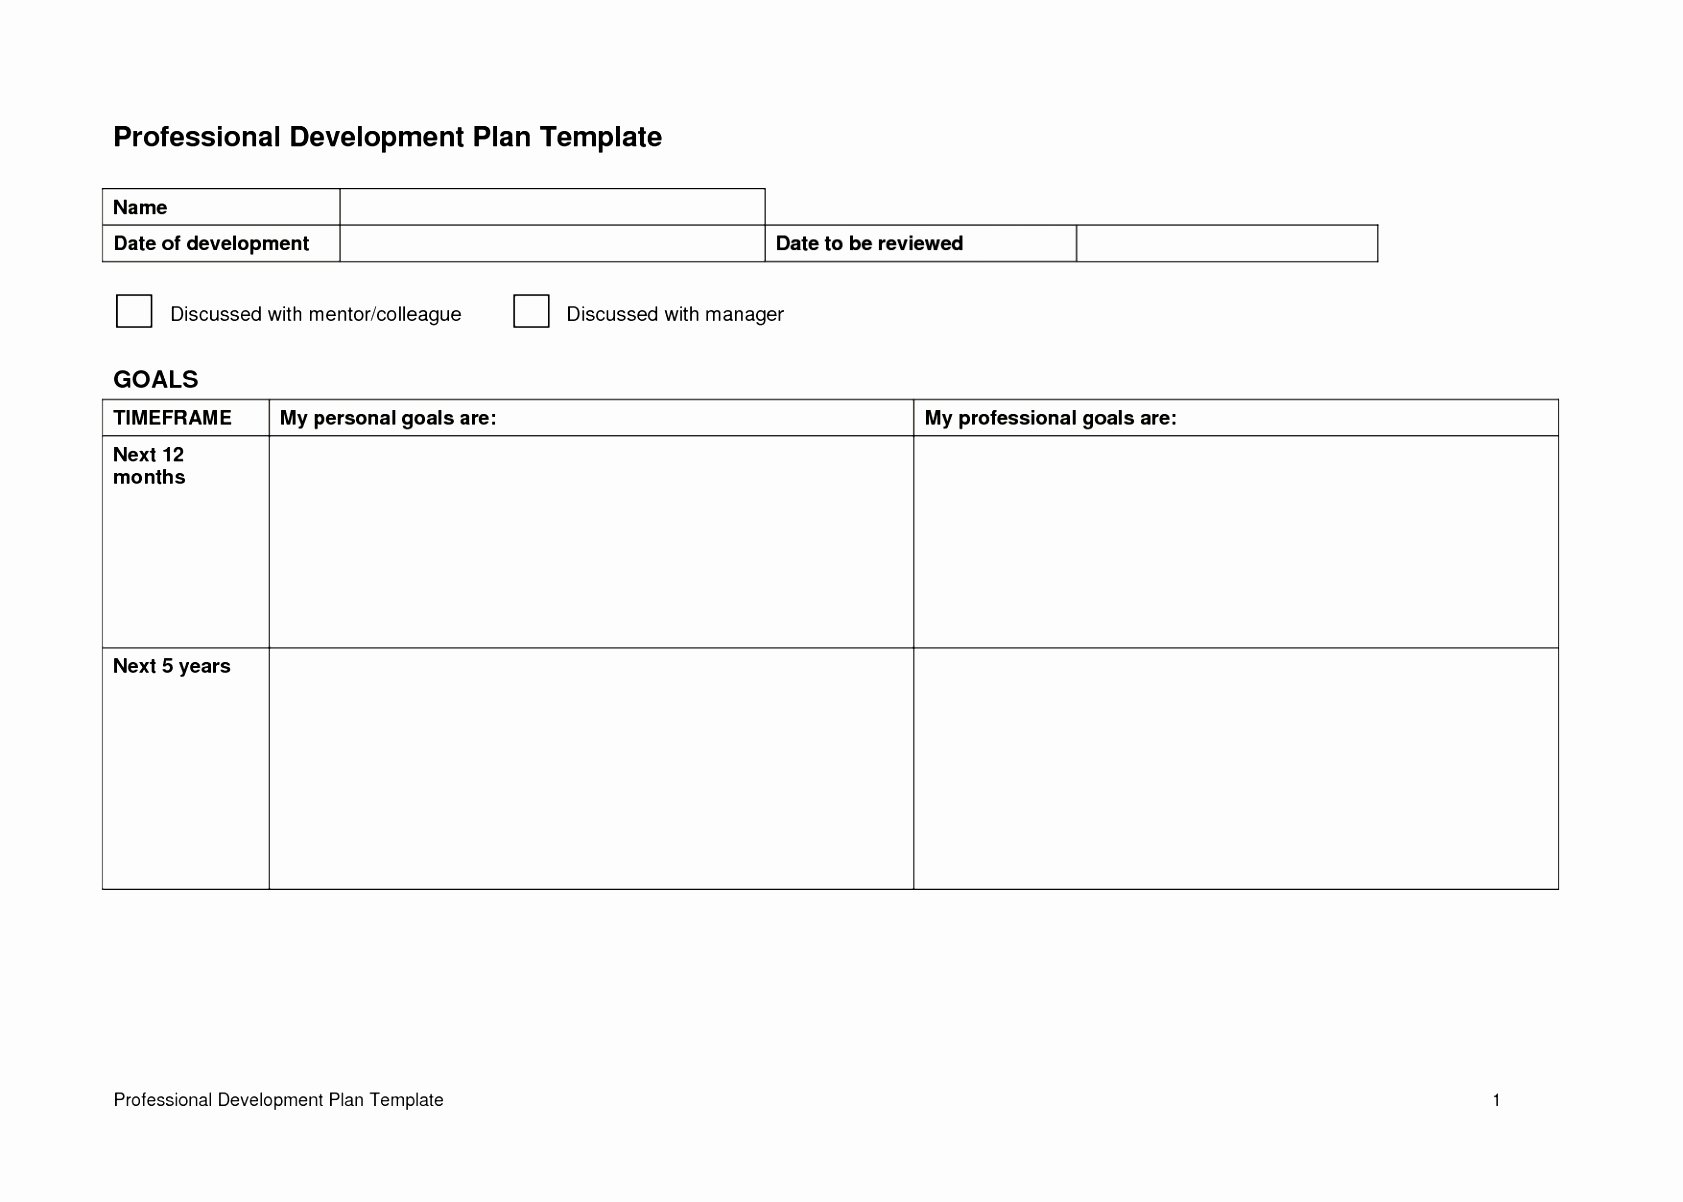 Professional Development Plan Template Inspirational Recent Articles Re Cpd Simple Personal and Professional